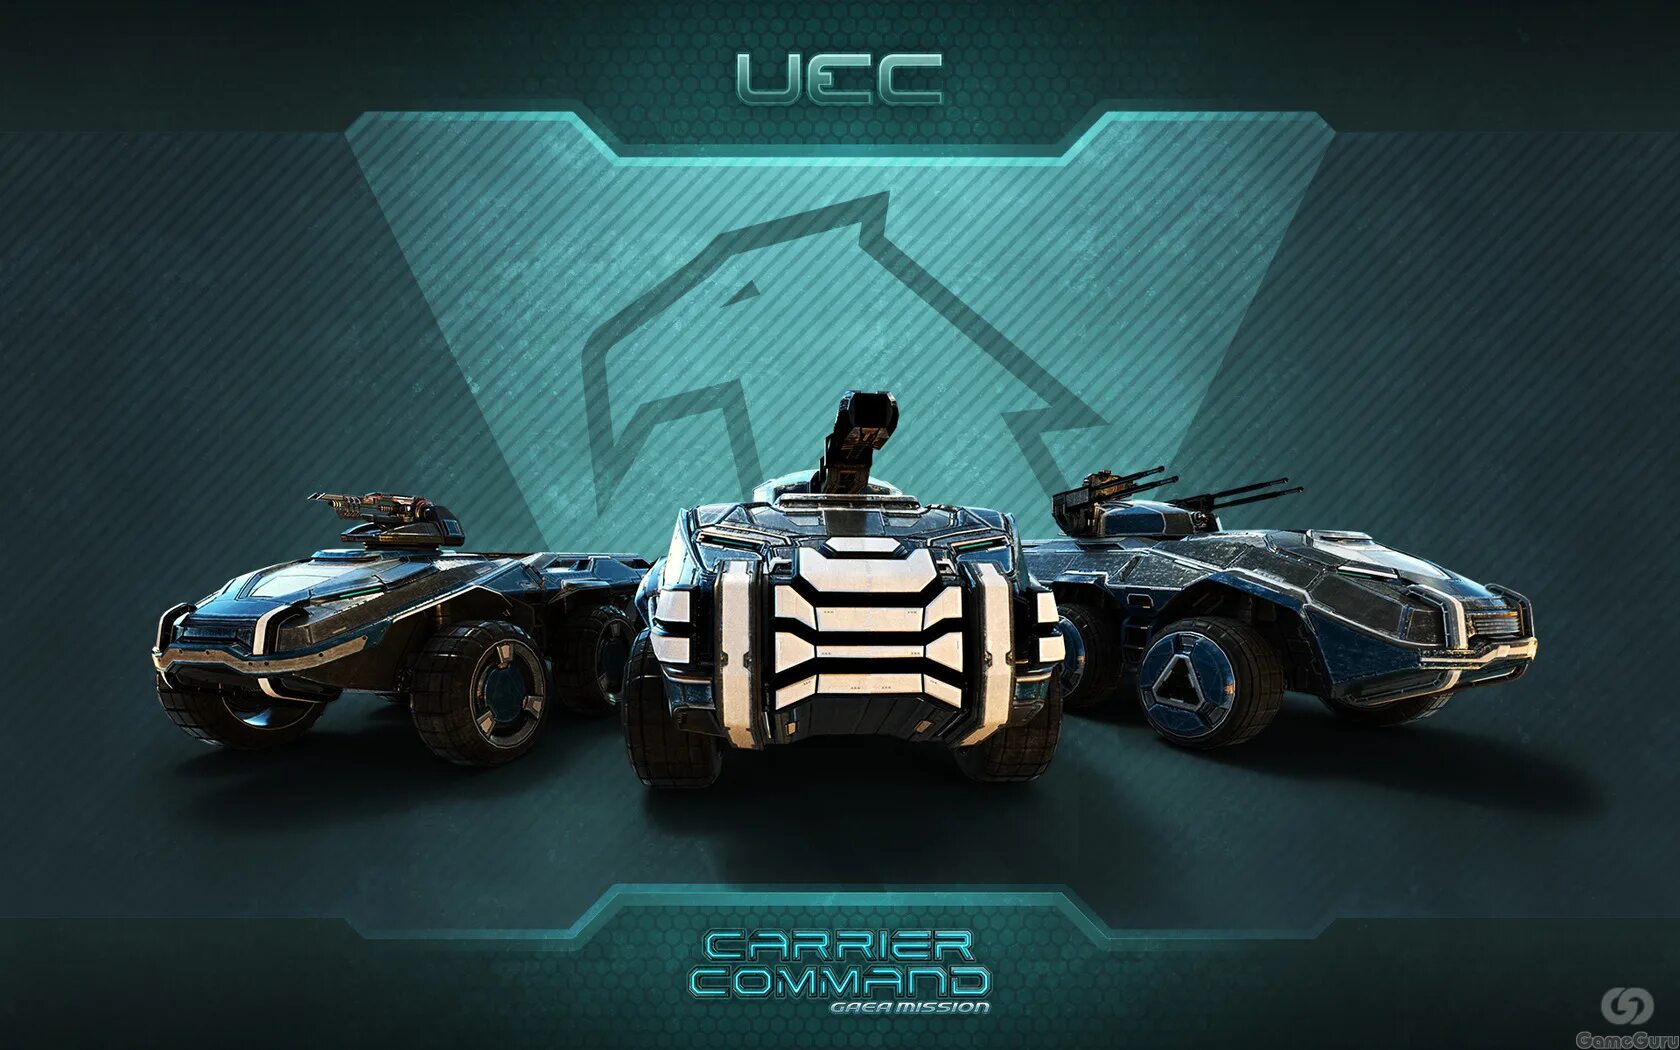 Carrier Command Gaea Mission. Carrier Command 1. Carrier Command: Gaea Mission корабль. Carrier Command: Gaea Mission Wallpaper. Mission command